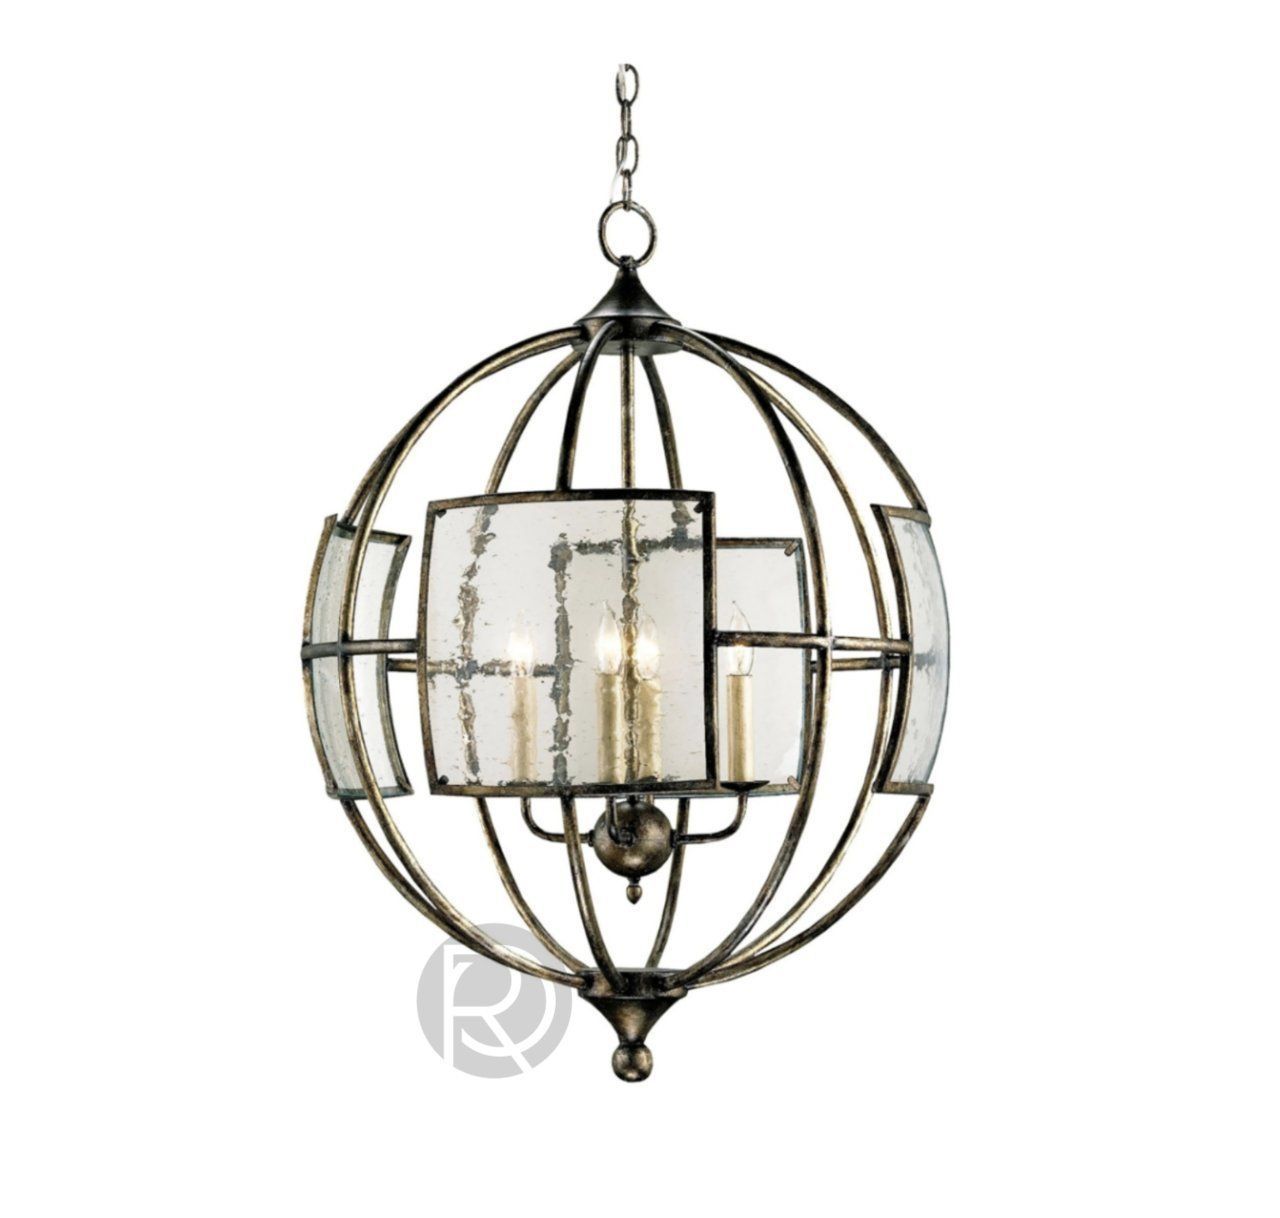 BROXTON SILVER ORB chandelier by Currey & Company